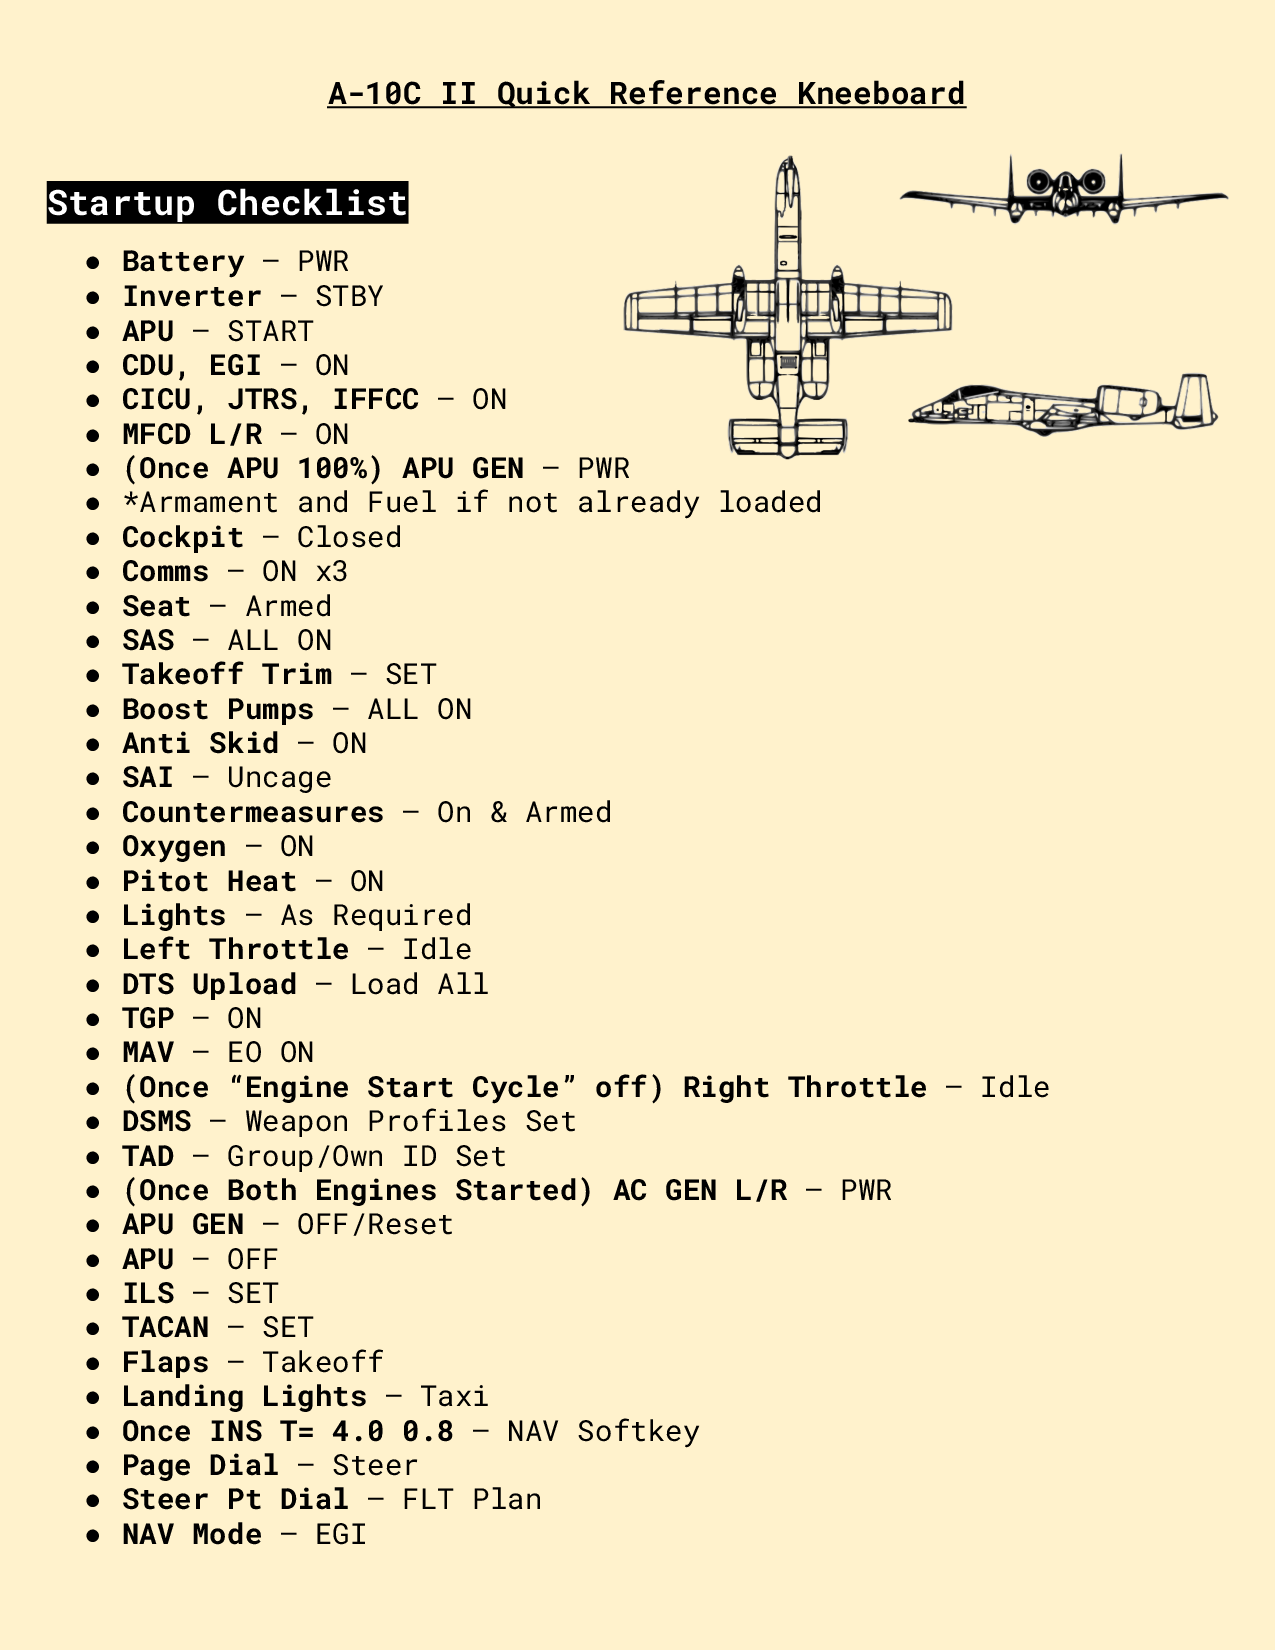 A-10C II Warthog Quick Reference Kneeboard and Checklists